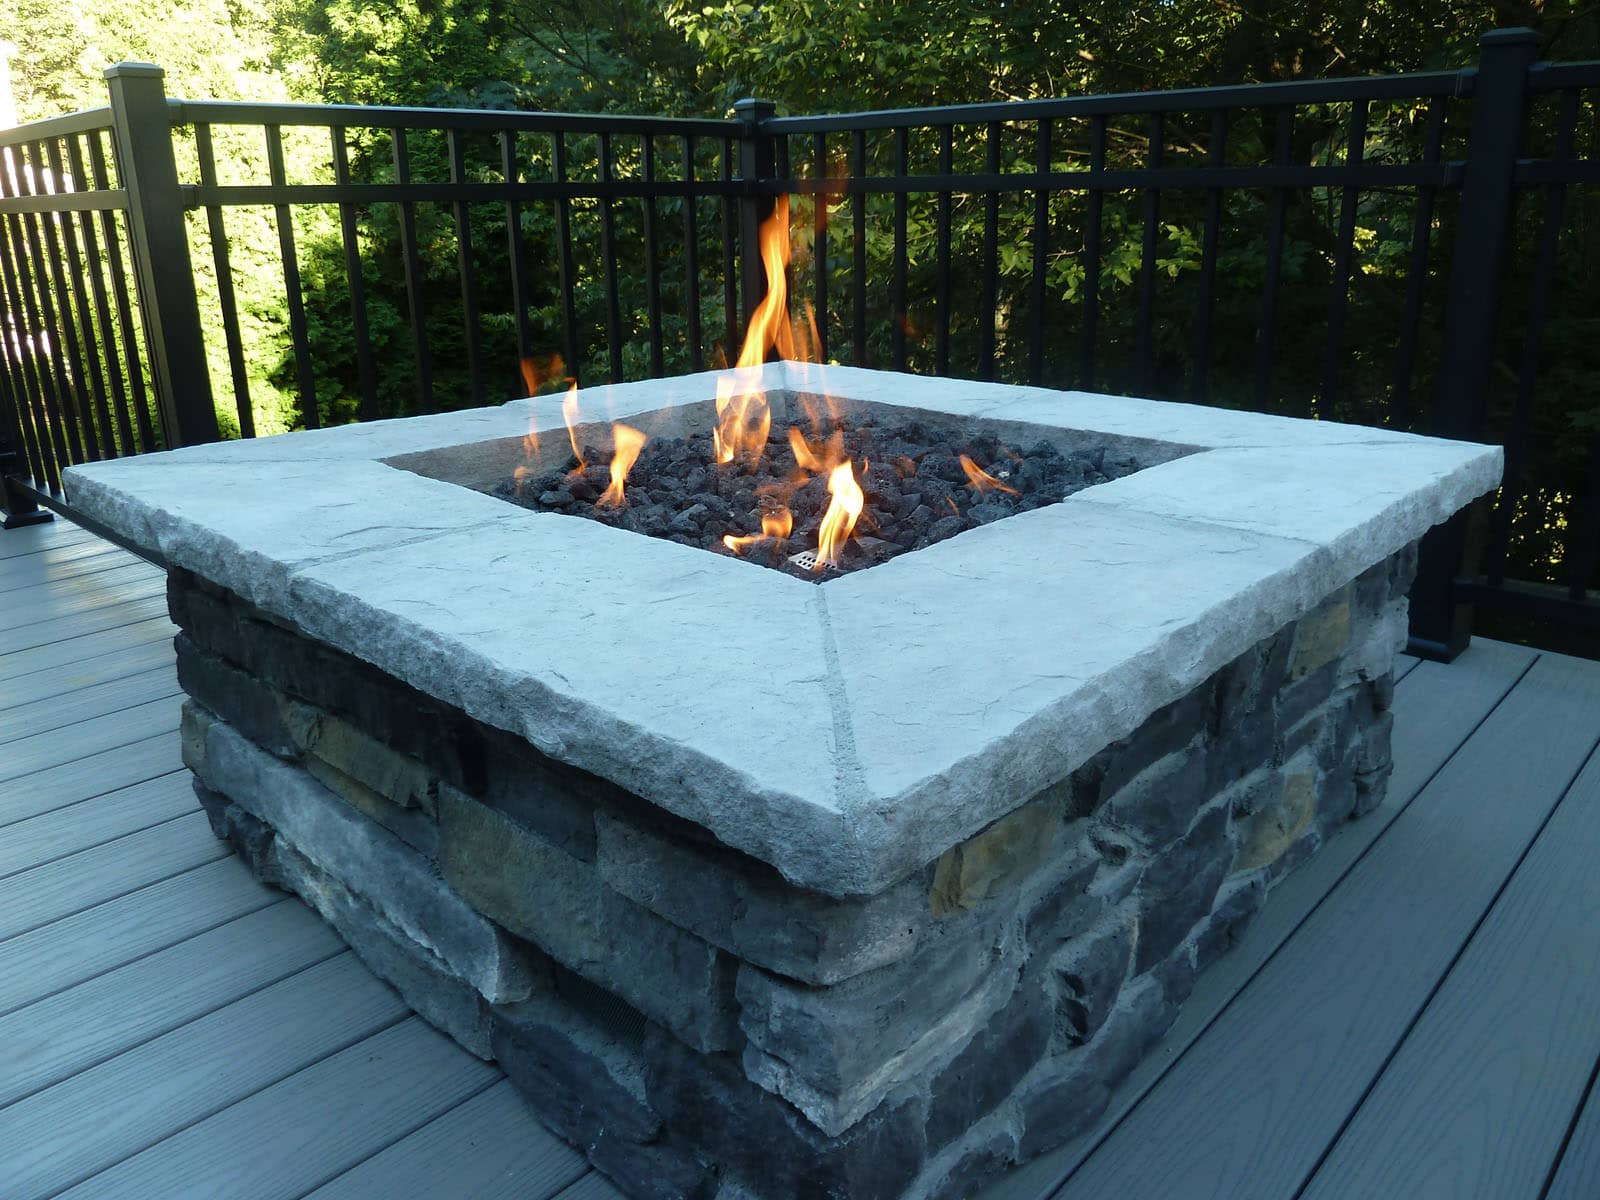 This gas firepit creates the perfect place to kick back and relax after a long day.